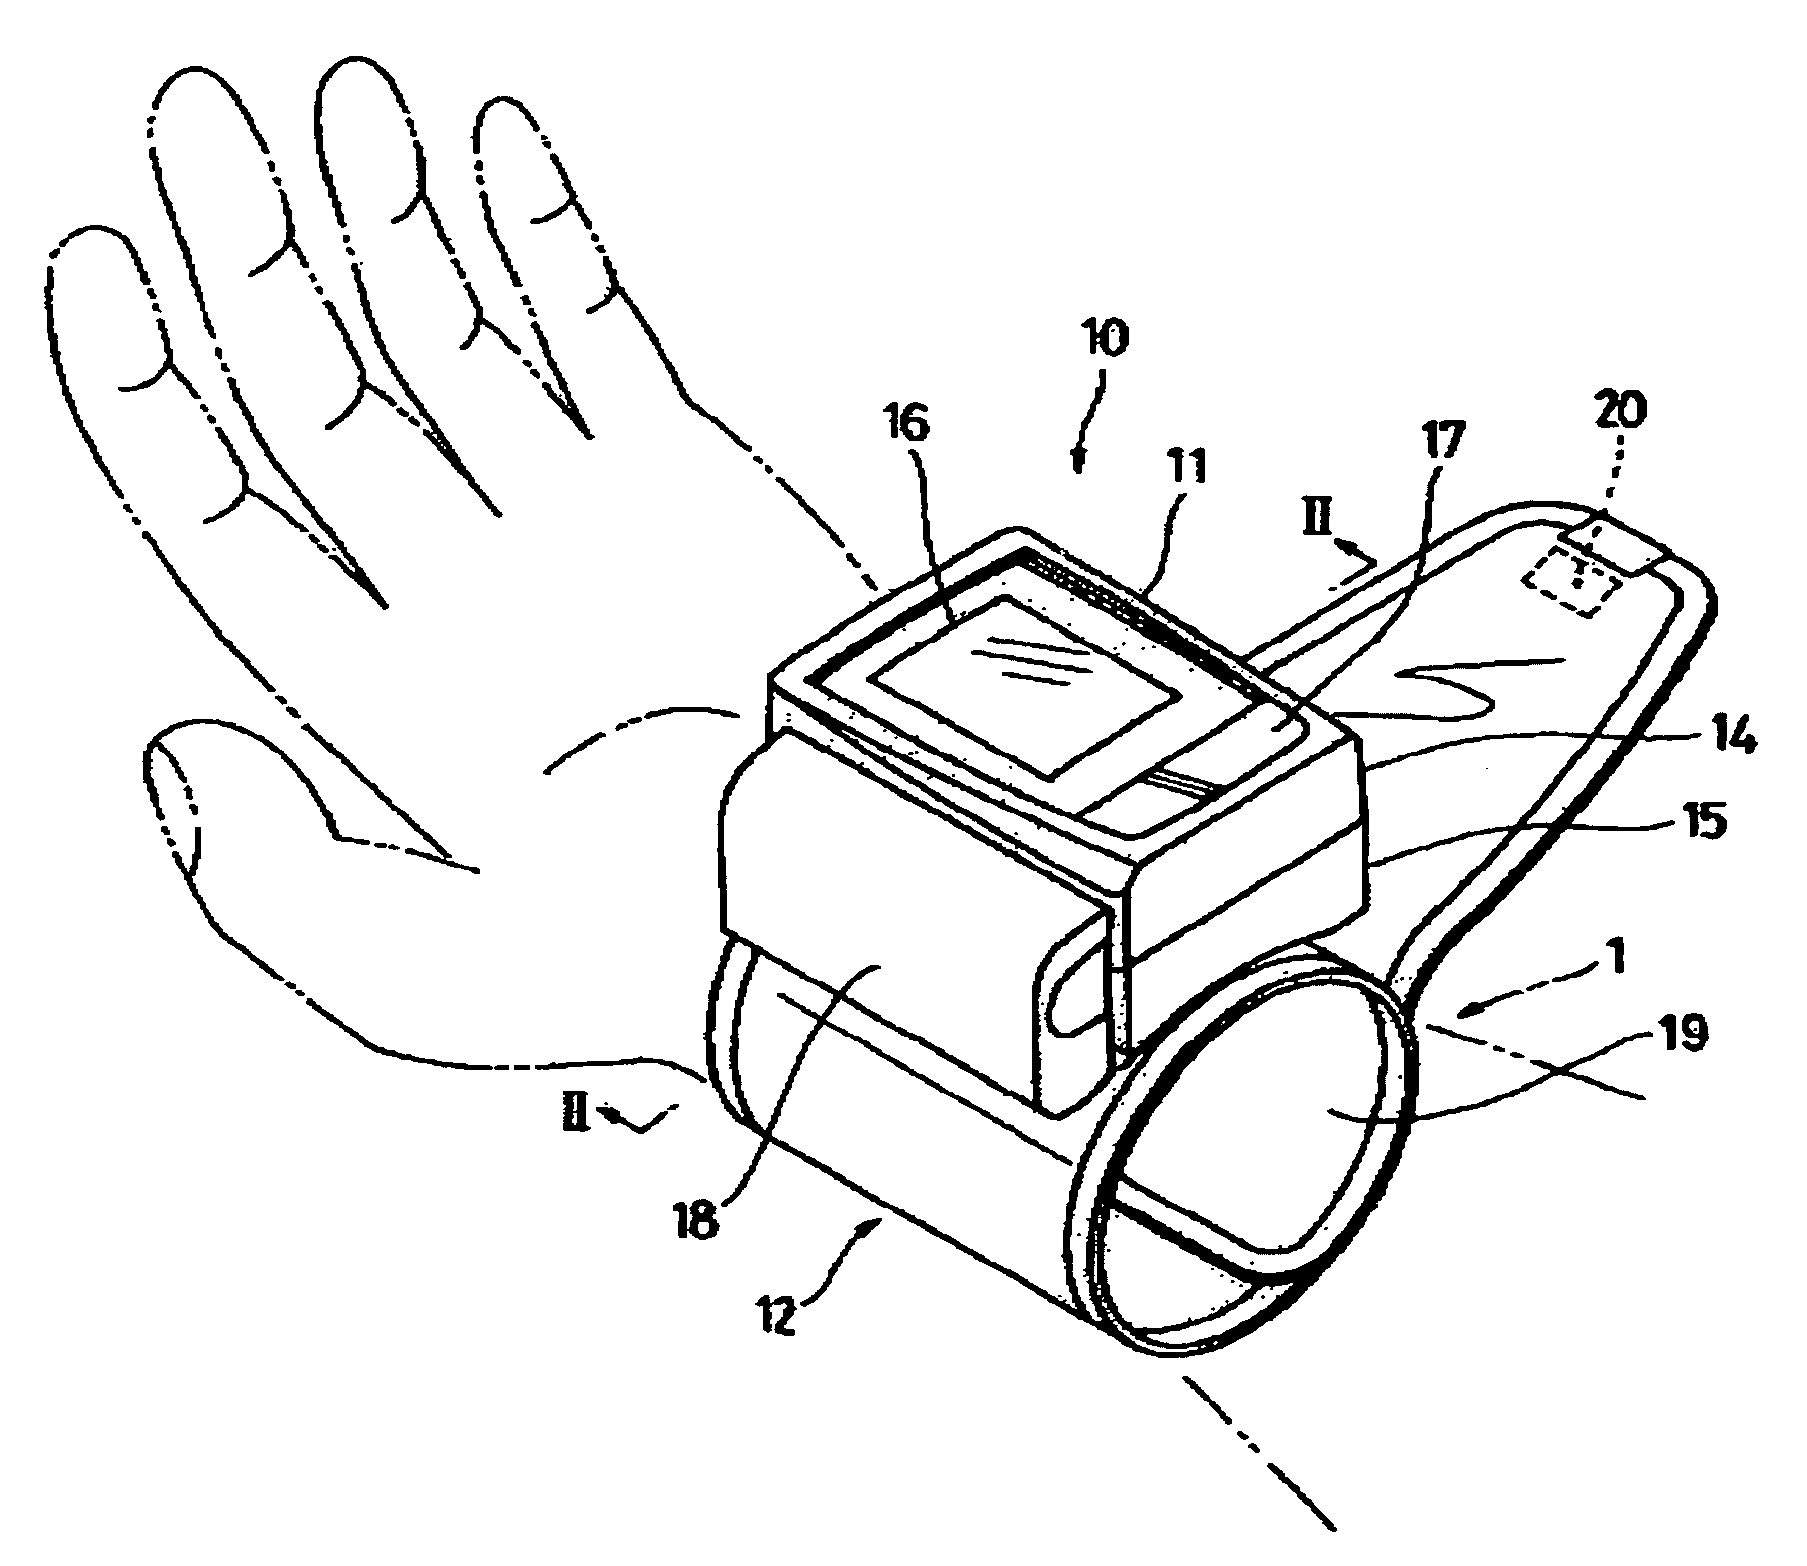 Wrist sphygmomanometer and cuff spring for the same